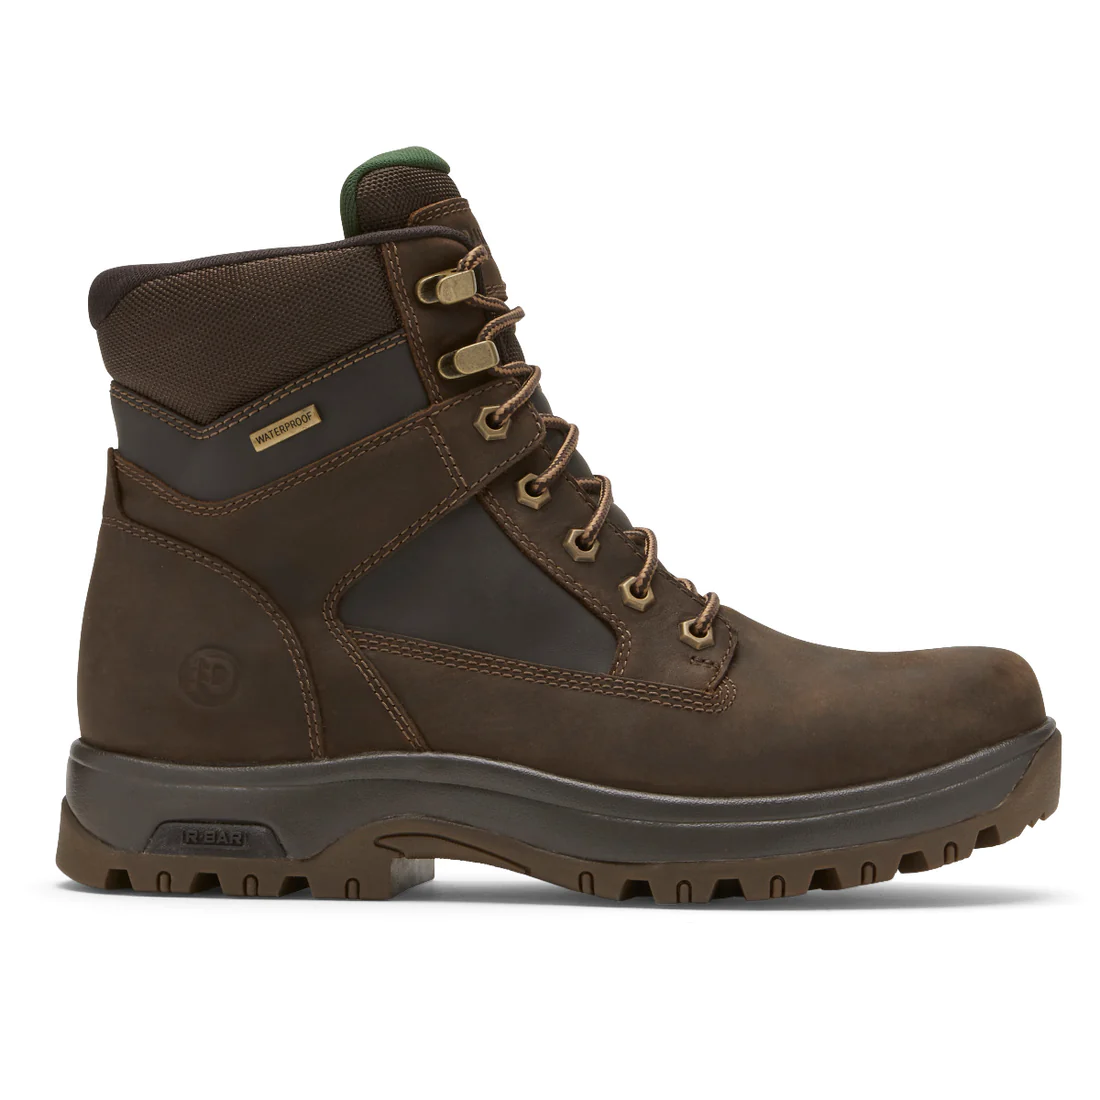 Men's Dunham 8000Works 6" Boot - Brown Leather